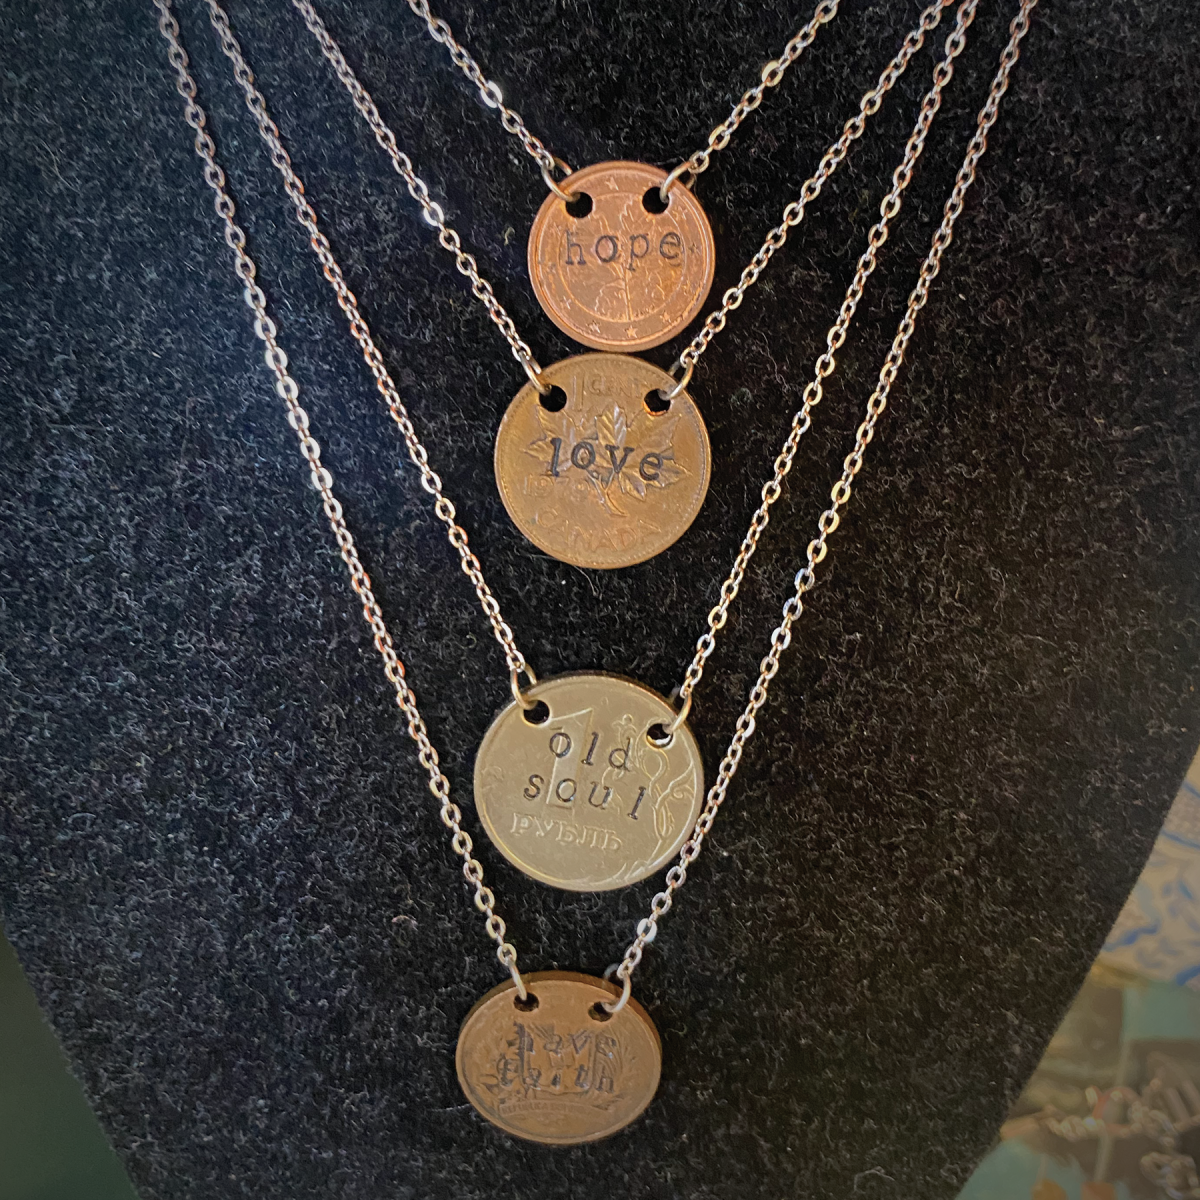 2022 Holiday Gift Guide: Vintage Coin Necklaces